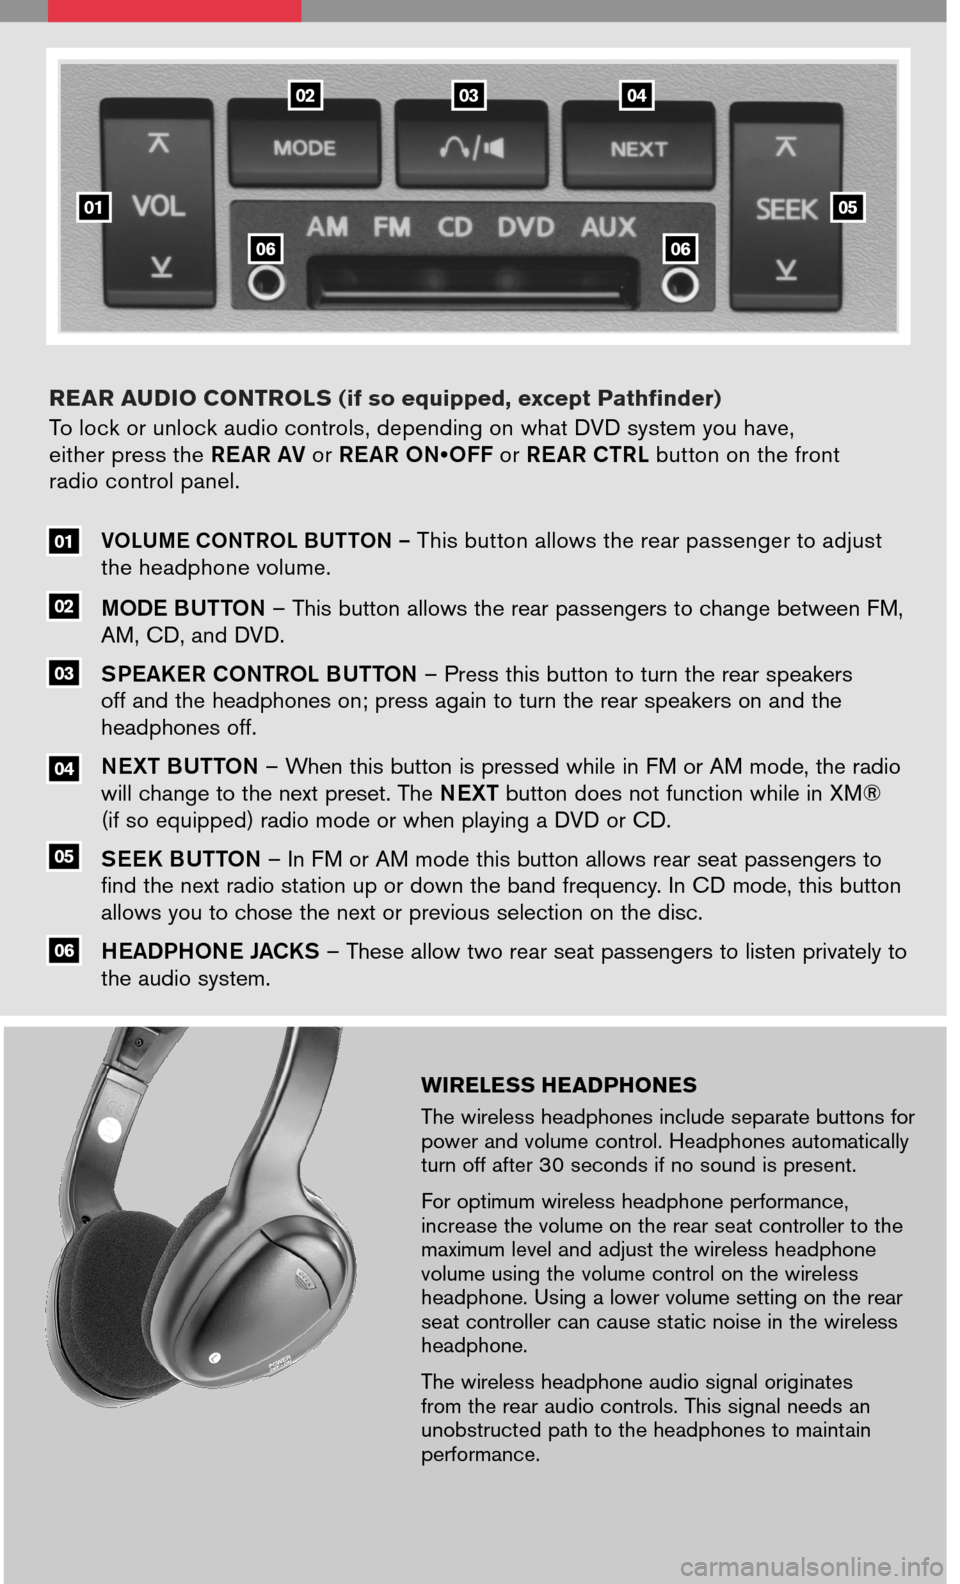 NISSAN PATHFINDER 2008 R51 / 3.G Entertainment Syst 
WIRELESS HEADPHONES
The wireless headphones include separate buttons for power and volume control. Headphones automatically turn off after 30 seconds if no sound is present.
For optimum wireless head